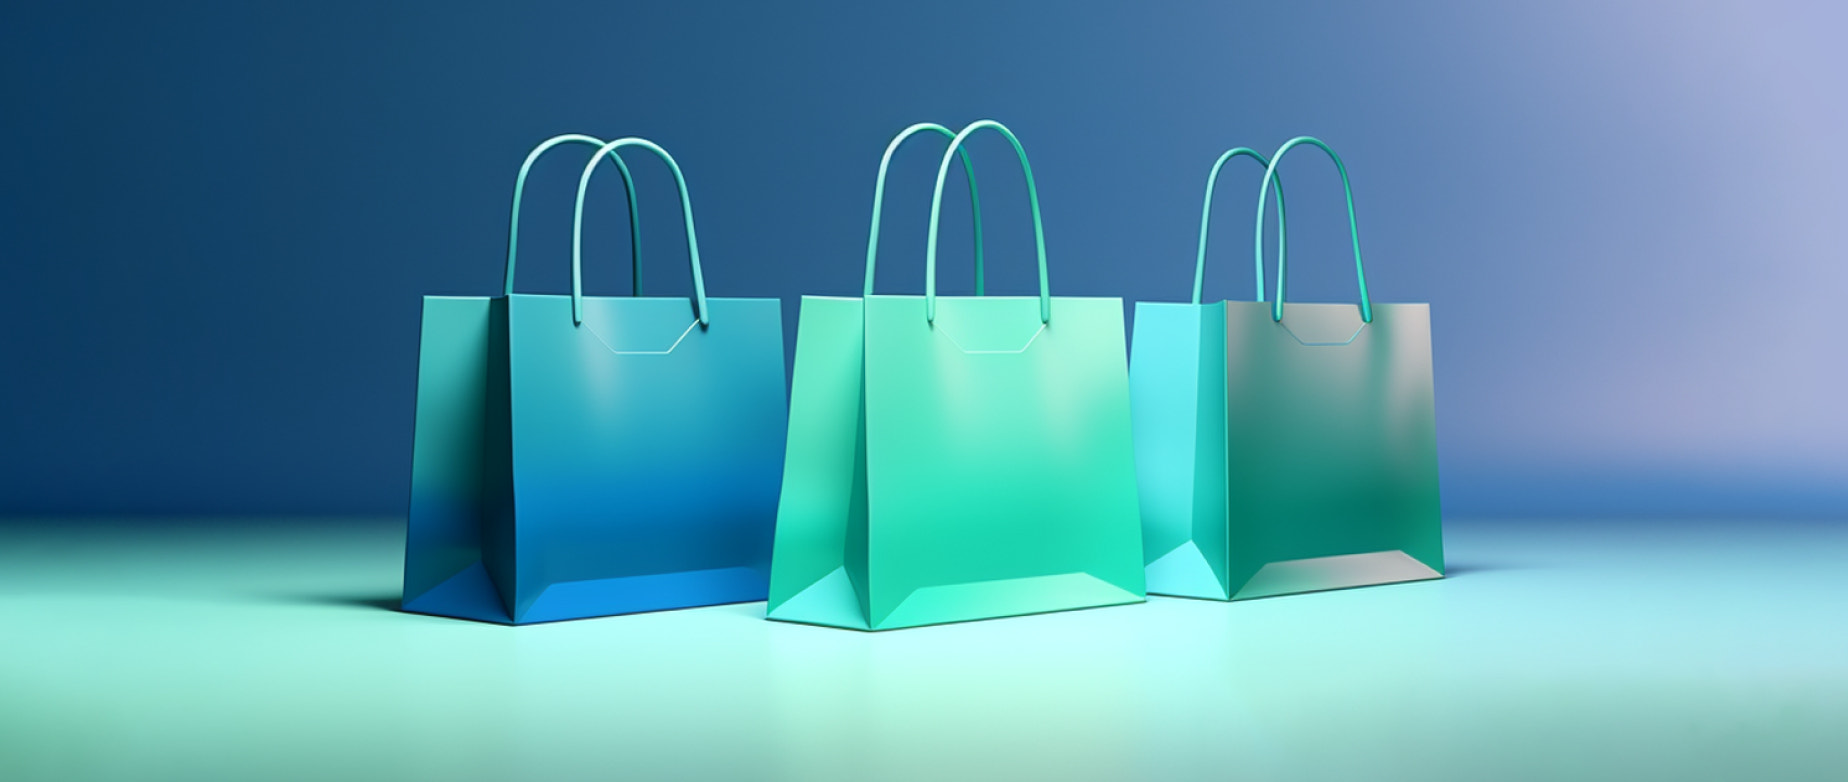 How Custom Tote Bags Can Help You Improve Your Business